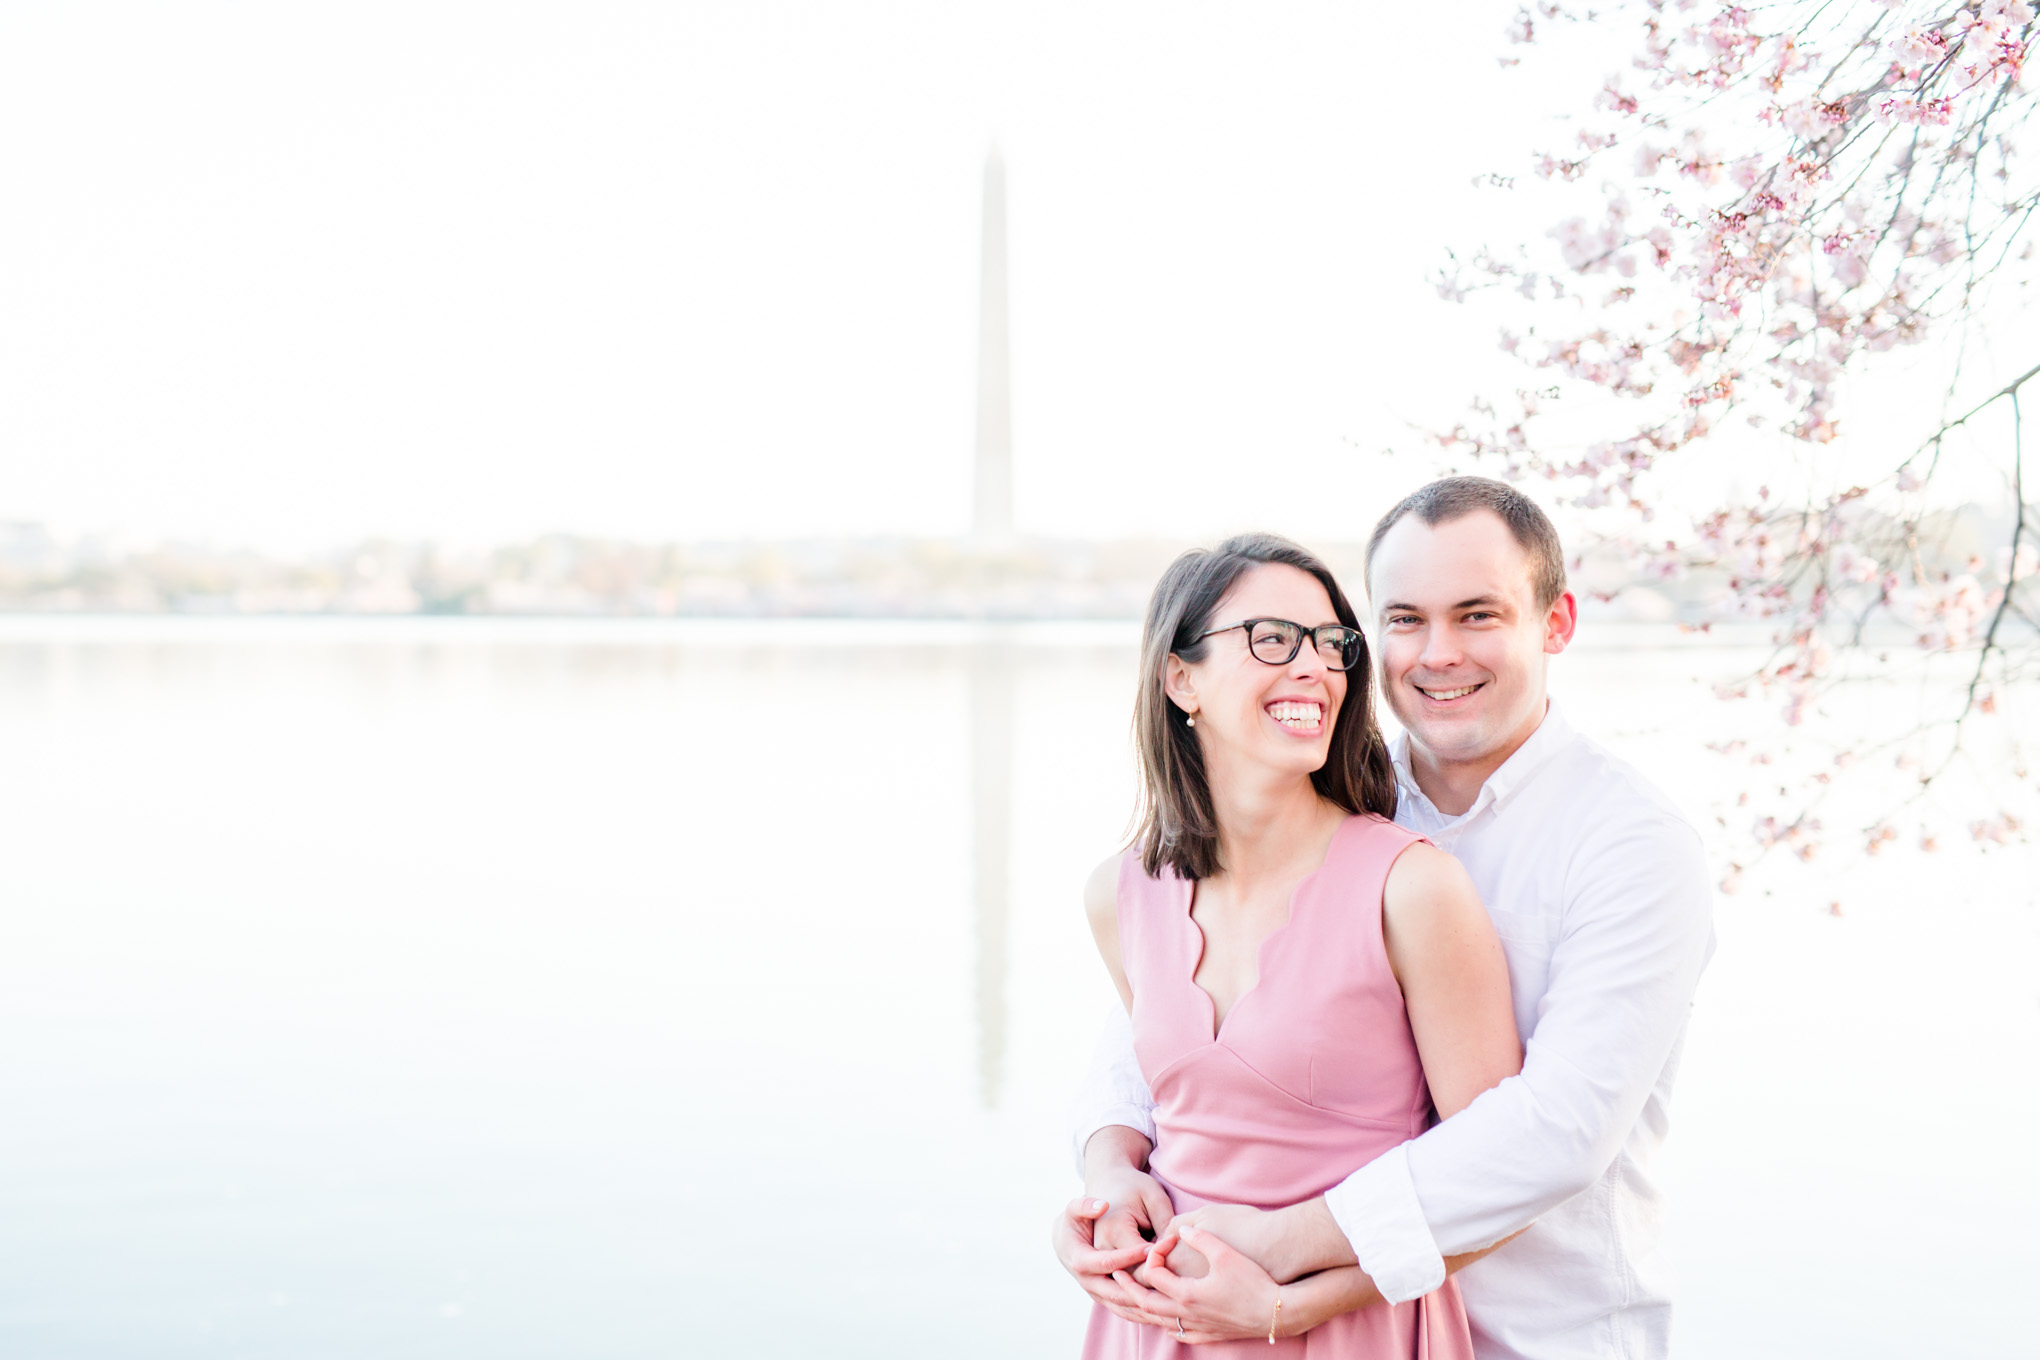 sunny cherry blossoms engagement session, Washington, D.C. engagement photos, Washington D.C. engagement photos, sunrrise engagement photos, cherry blossom engagement photos, D.C. cherry bloossoms, D.C. cherry blossoms photos, cherry blossom photos, cherry blossoms portrraits, sunny engagement photos, classic engagement photos, Rachel E.H. Photography, engagement session style, couple laughing, Washington Monument